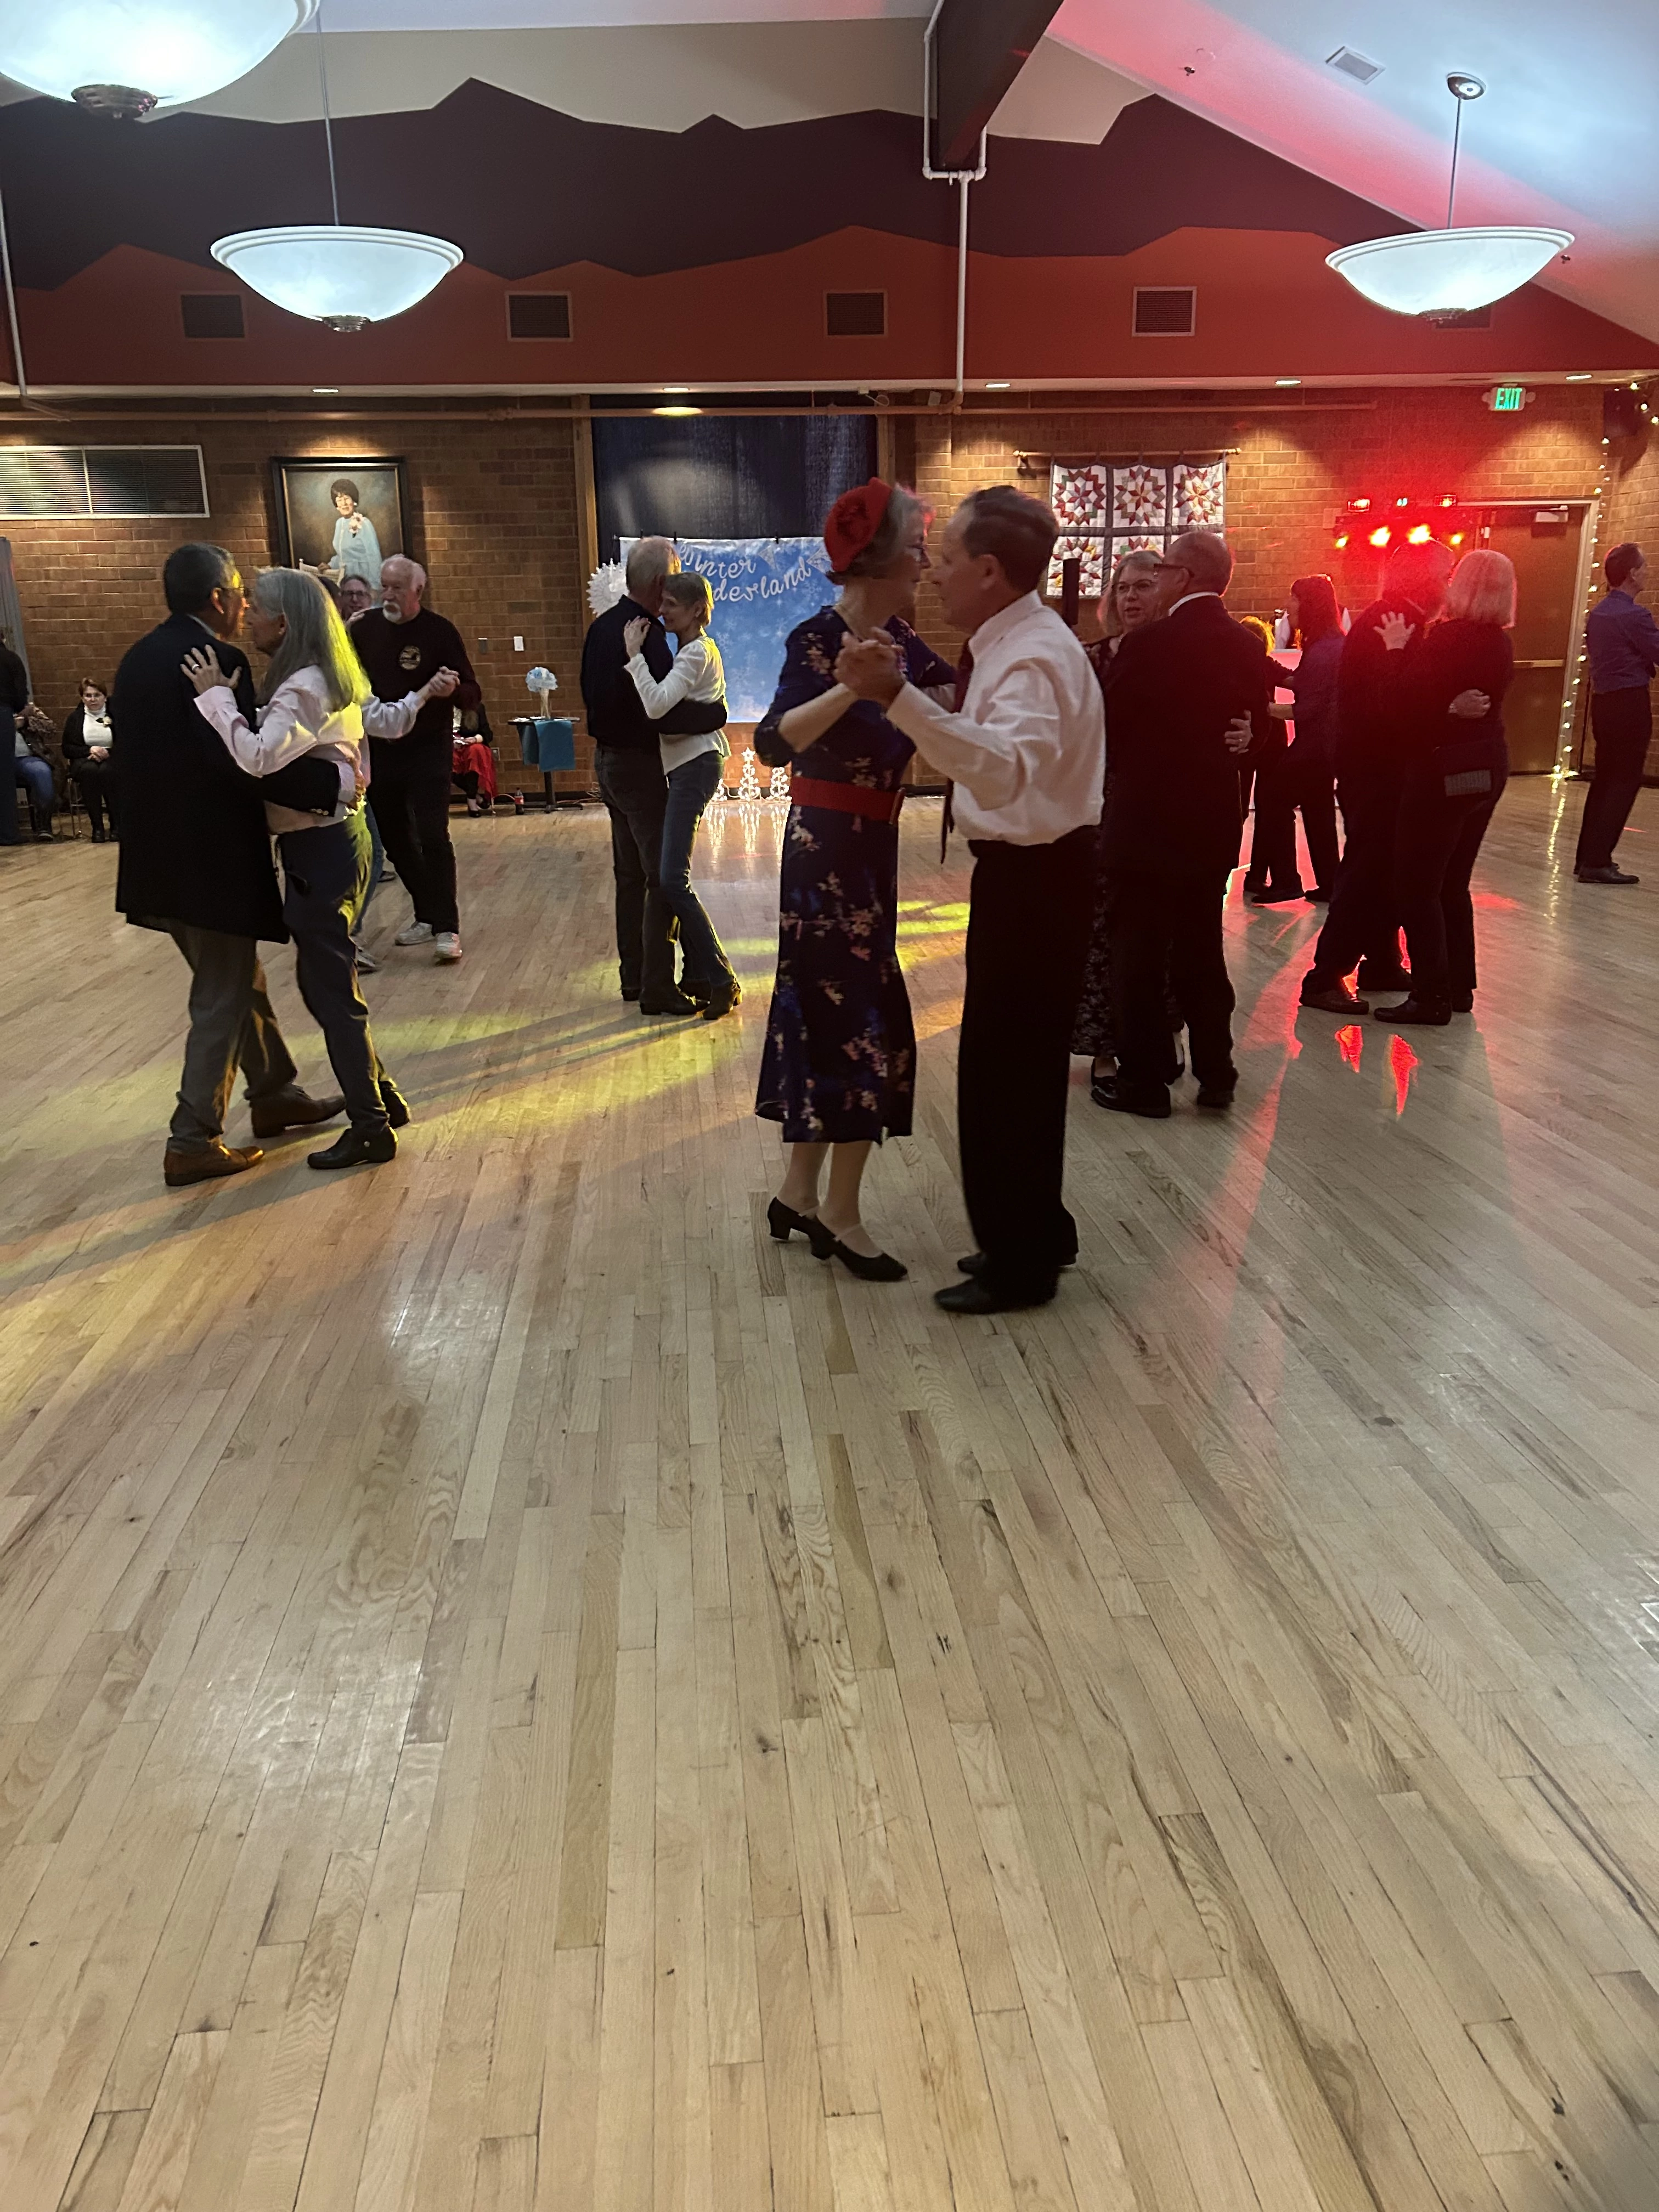 More that 70 seniors dressed up and had a wonderful time at the event! Just another way that Senior Helpers of Littleton is committed to helping seniors age in place with dignity and respect.